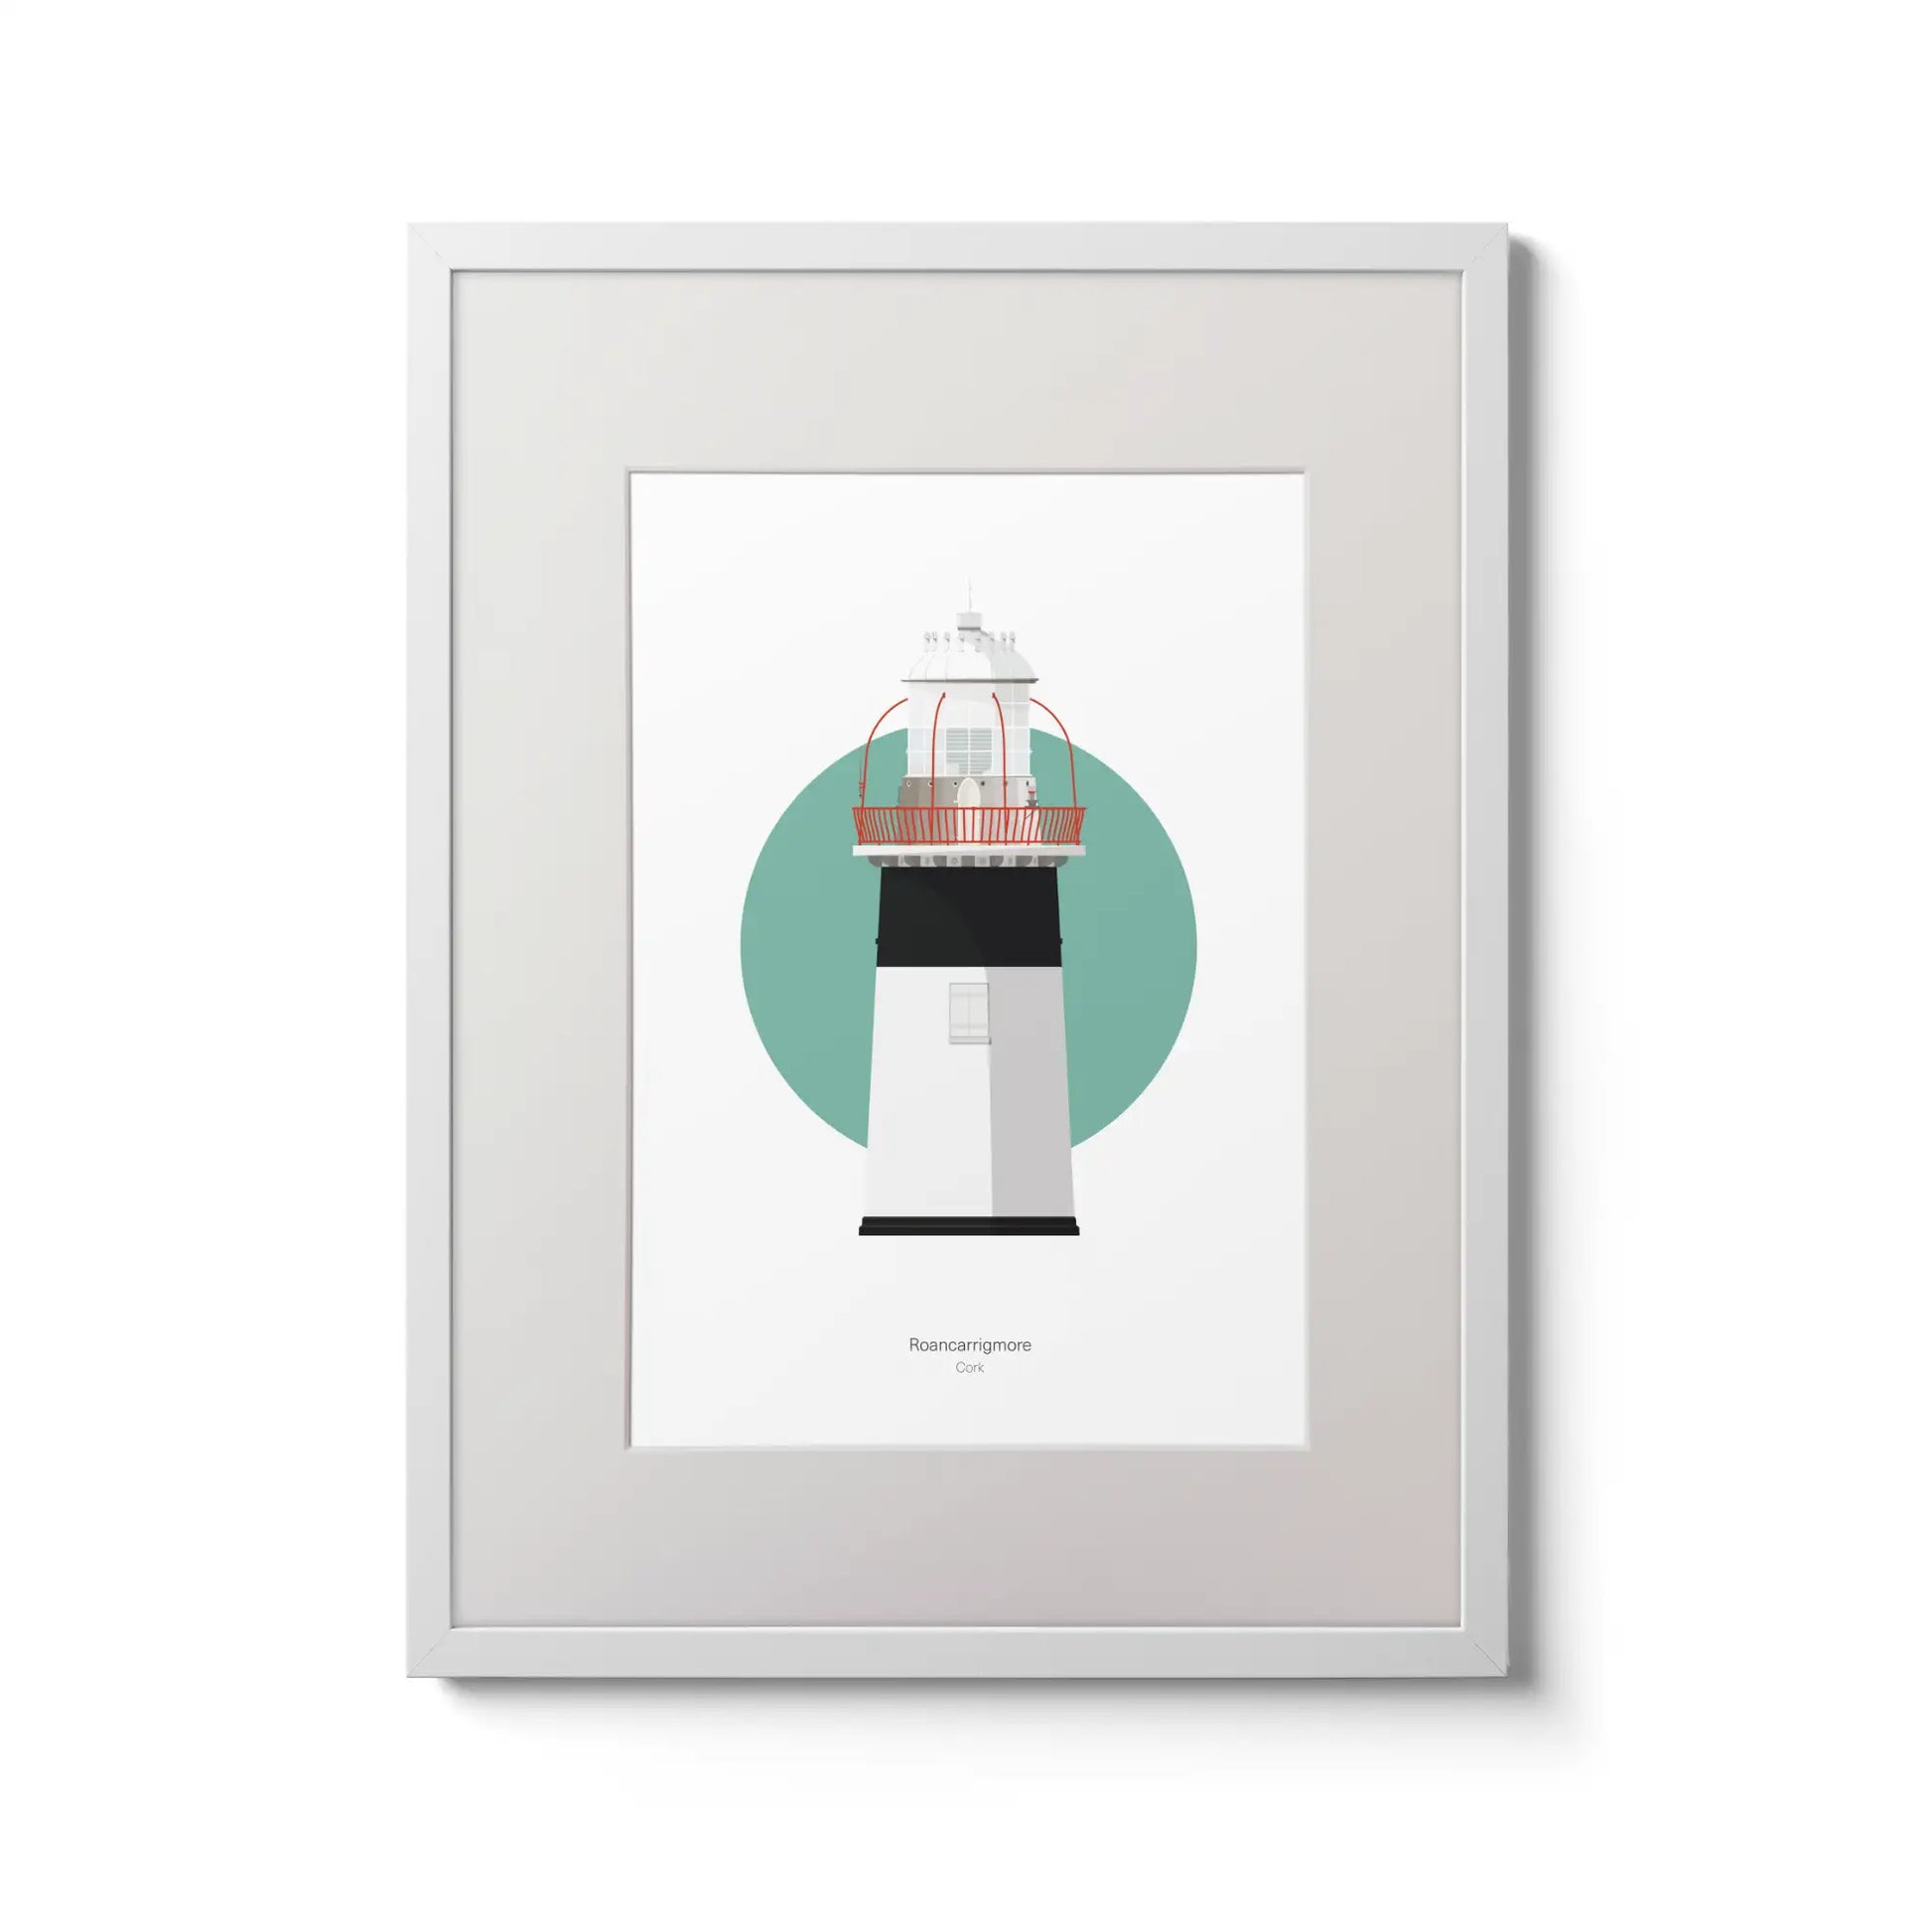 Illustration of Roancarrigmore lighthouse on a white background inside light blue square,  in a white frame measuring 30x40cm.